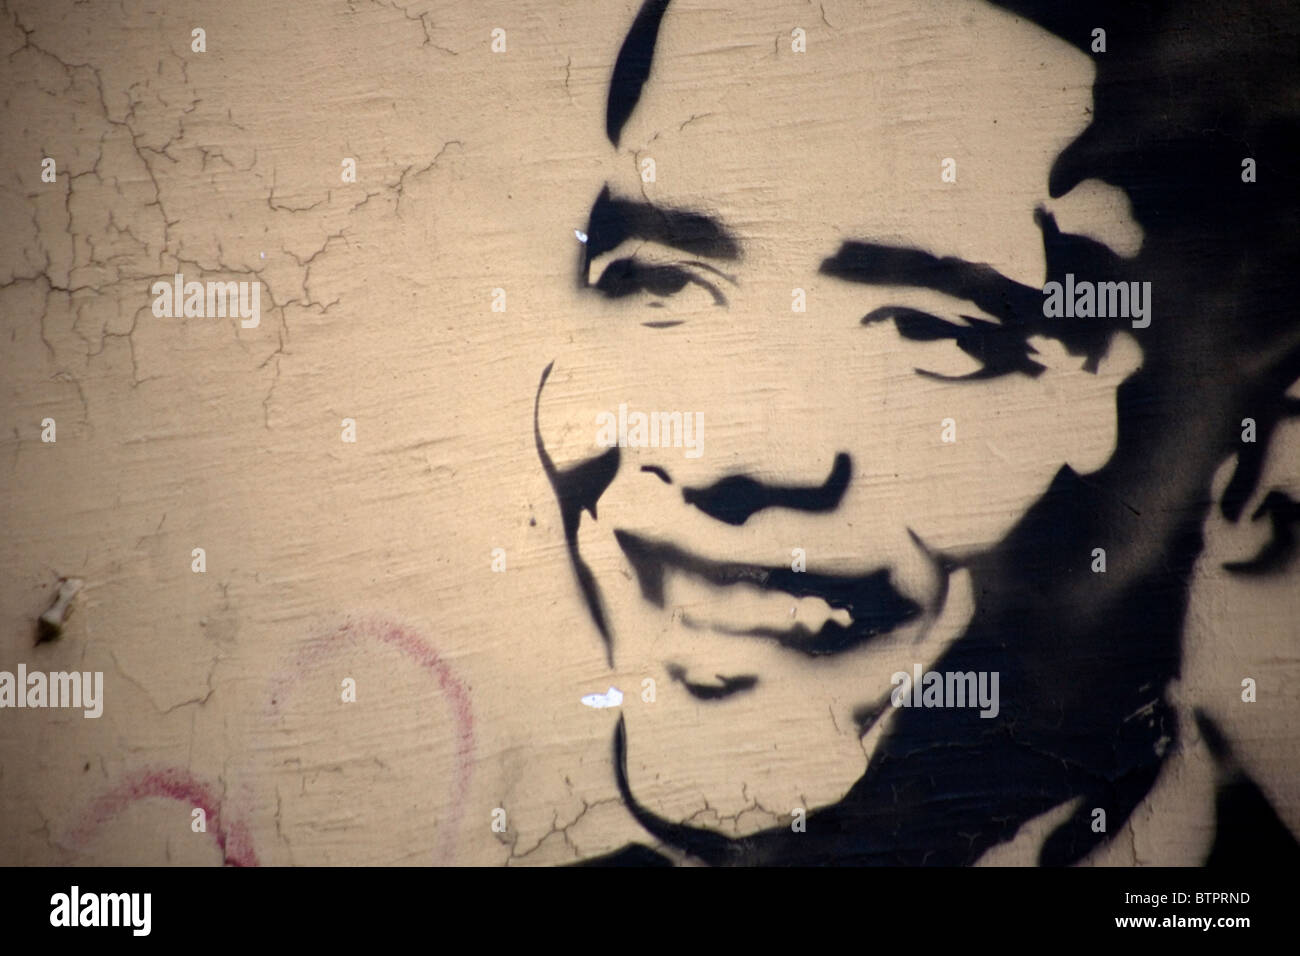 A street graffiti of U.S President Barak Obama is seen in a wall in Coyoacan neighborhood, Mexico City, October 30, 2010. Stock Photo